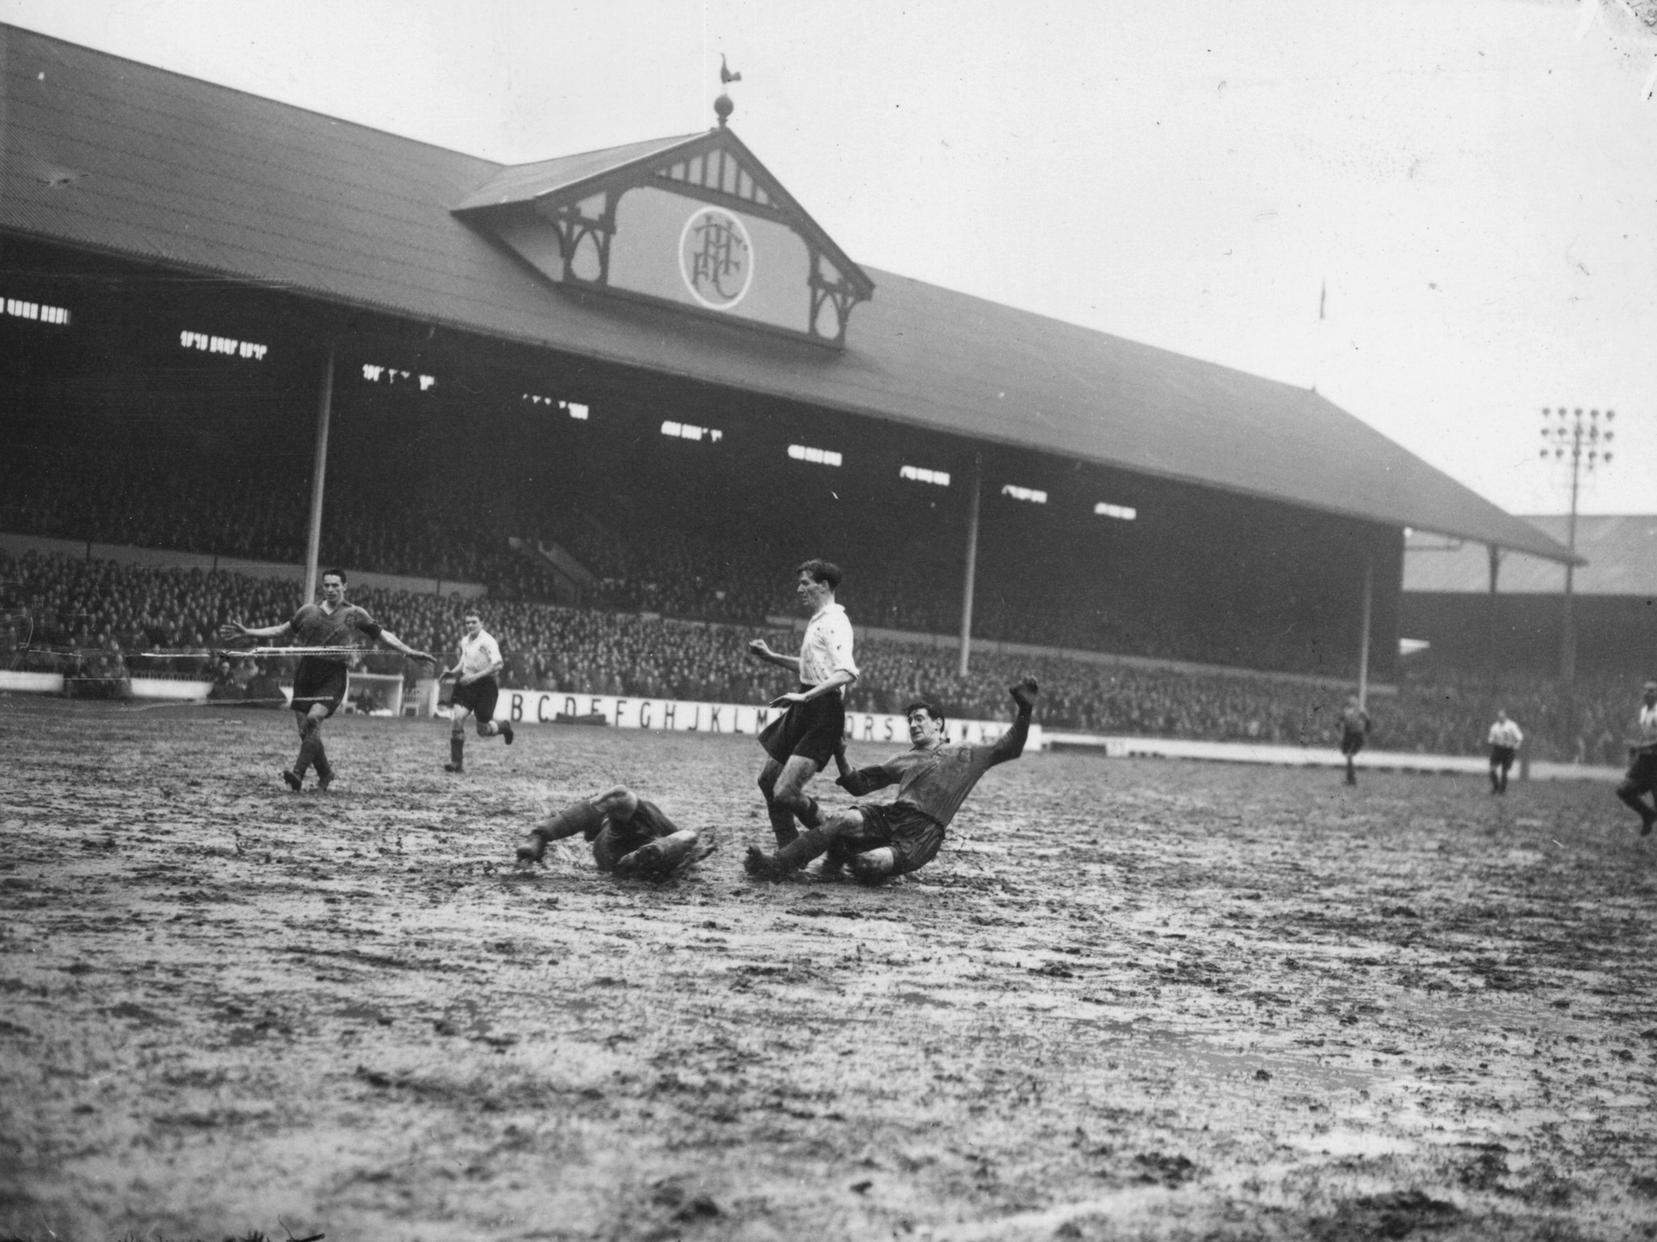 Tottenham Hotspur play Leeds United in an FA Cup third round replay at White Hart Lane